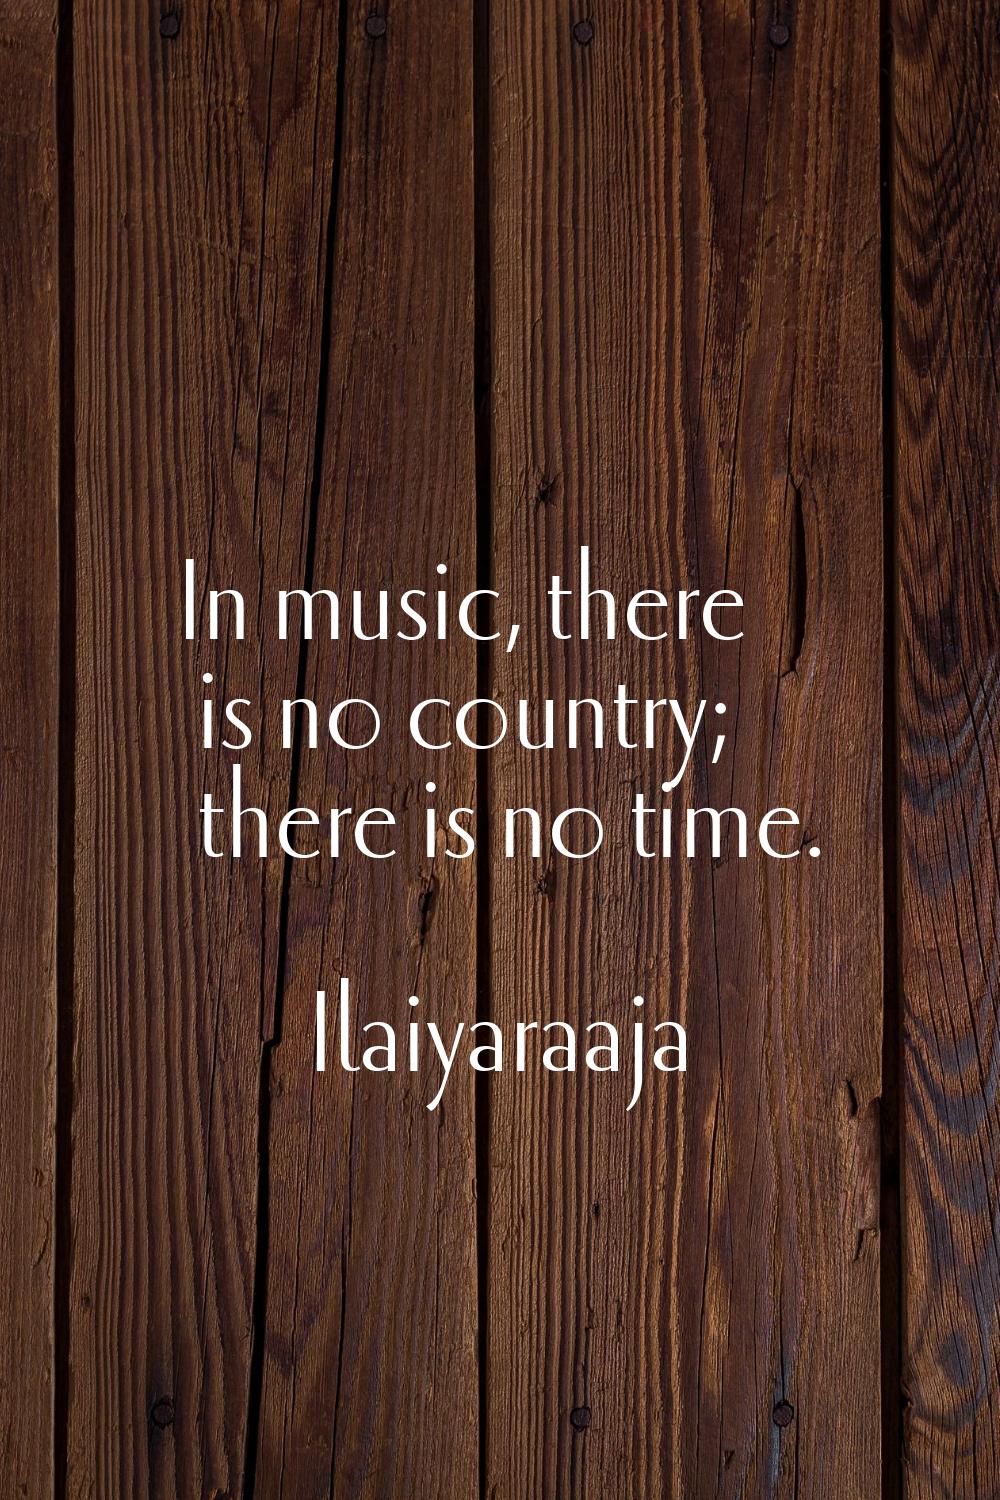 In music, there is no country; there is no time.